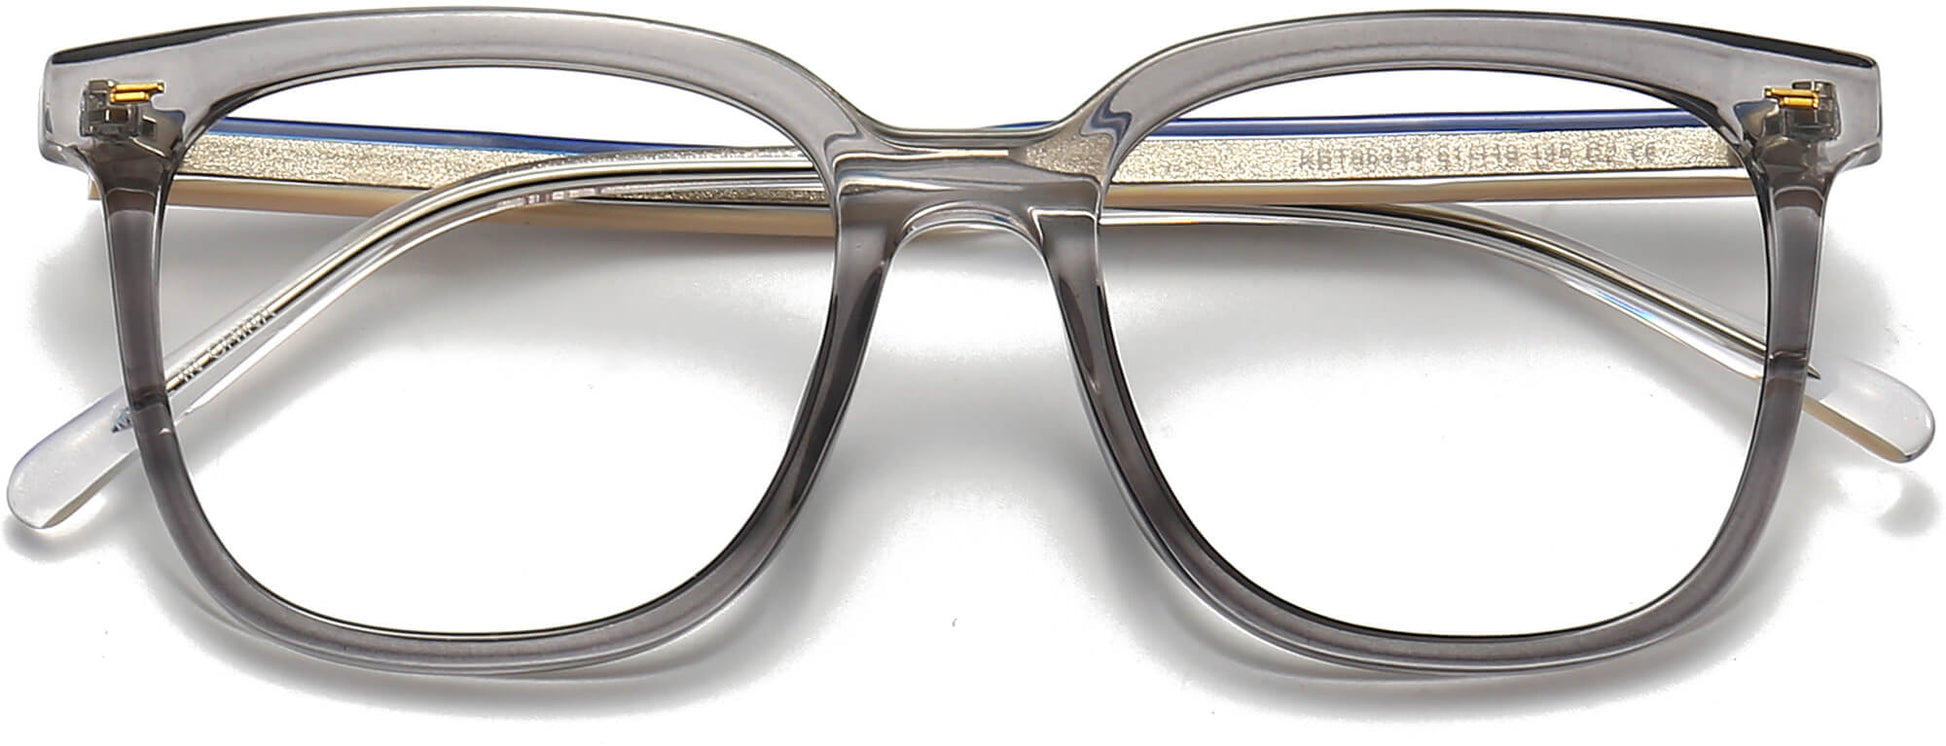 Oaklyn Square Gray Eyeglasses from ANRRI, closed view